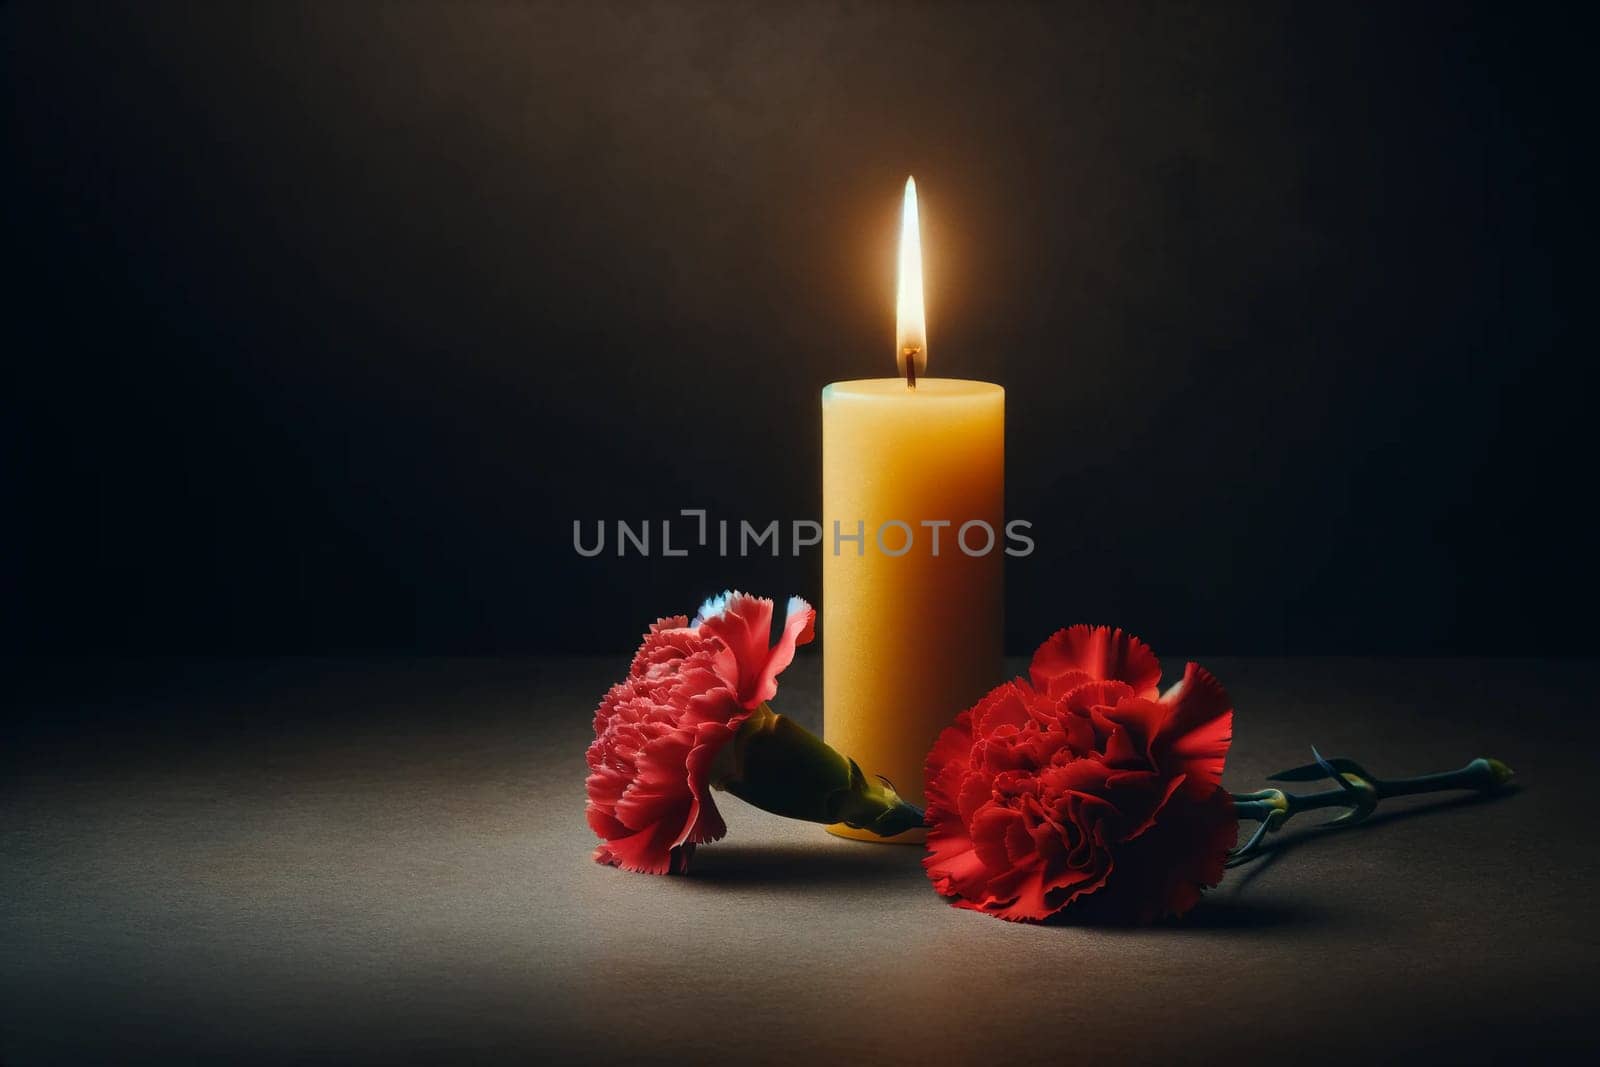 burning yellow wax candle and two red carnations on a dark background, a symbol of mourning and memory.